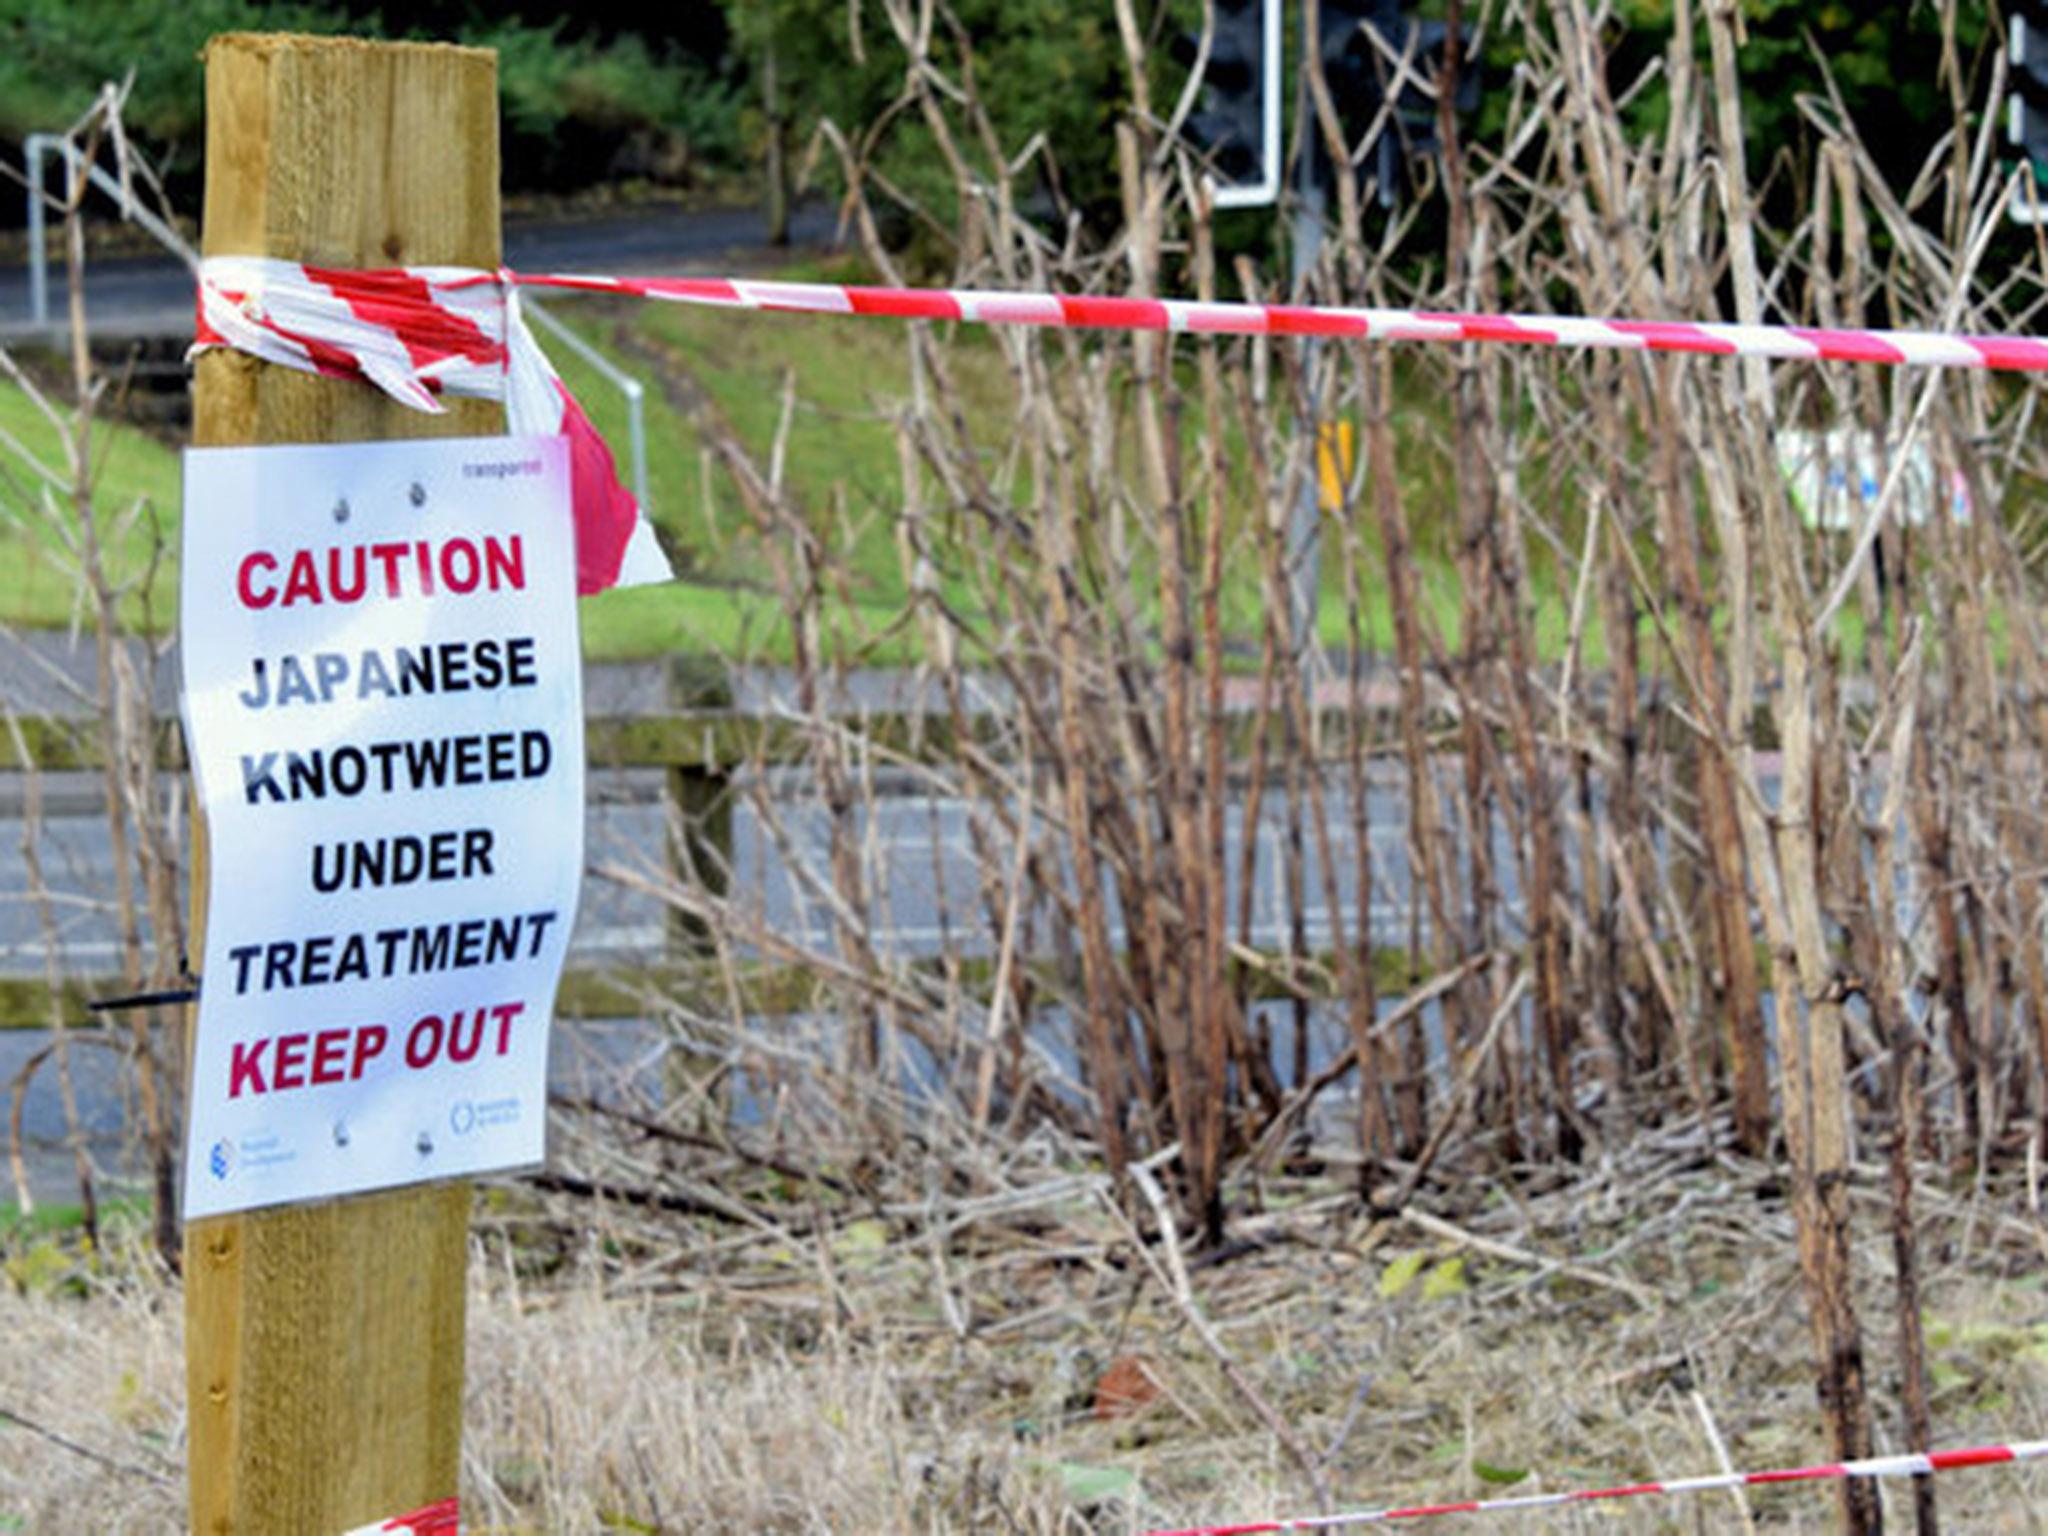 Japanese knotweed is listed by the World Conservation Union as one of the world’s worst invasive species